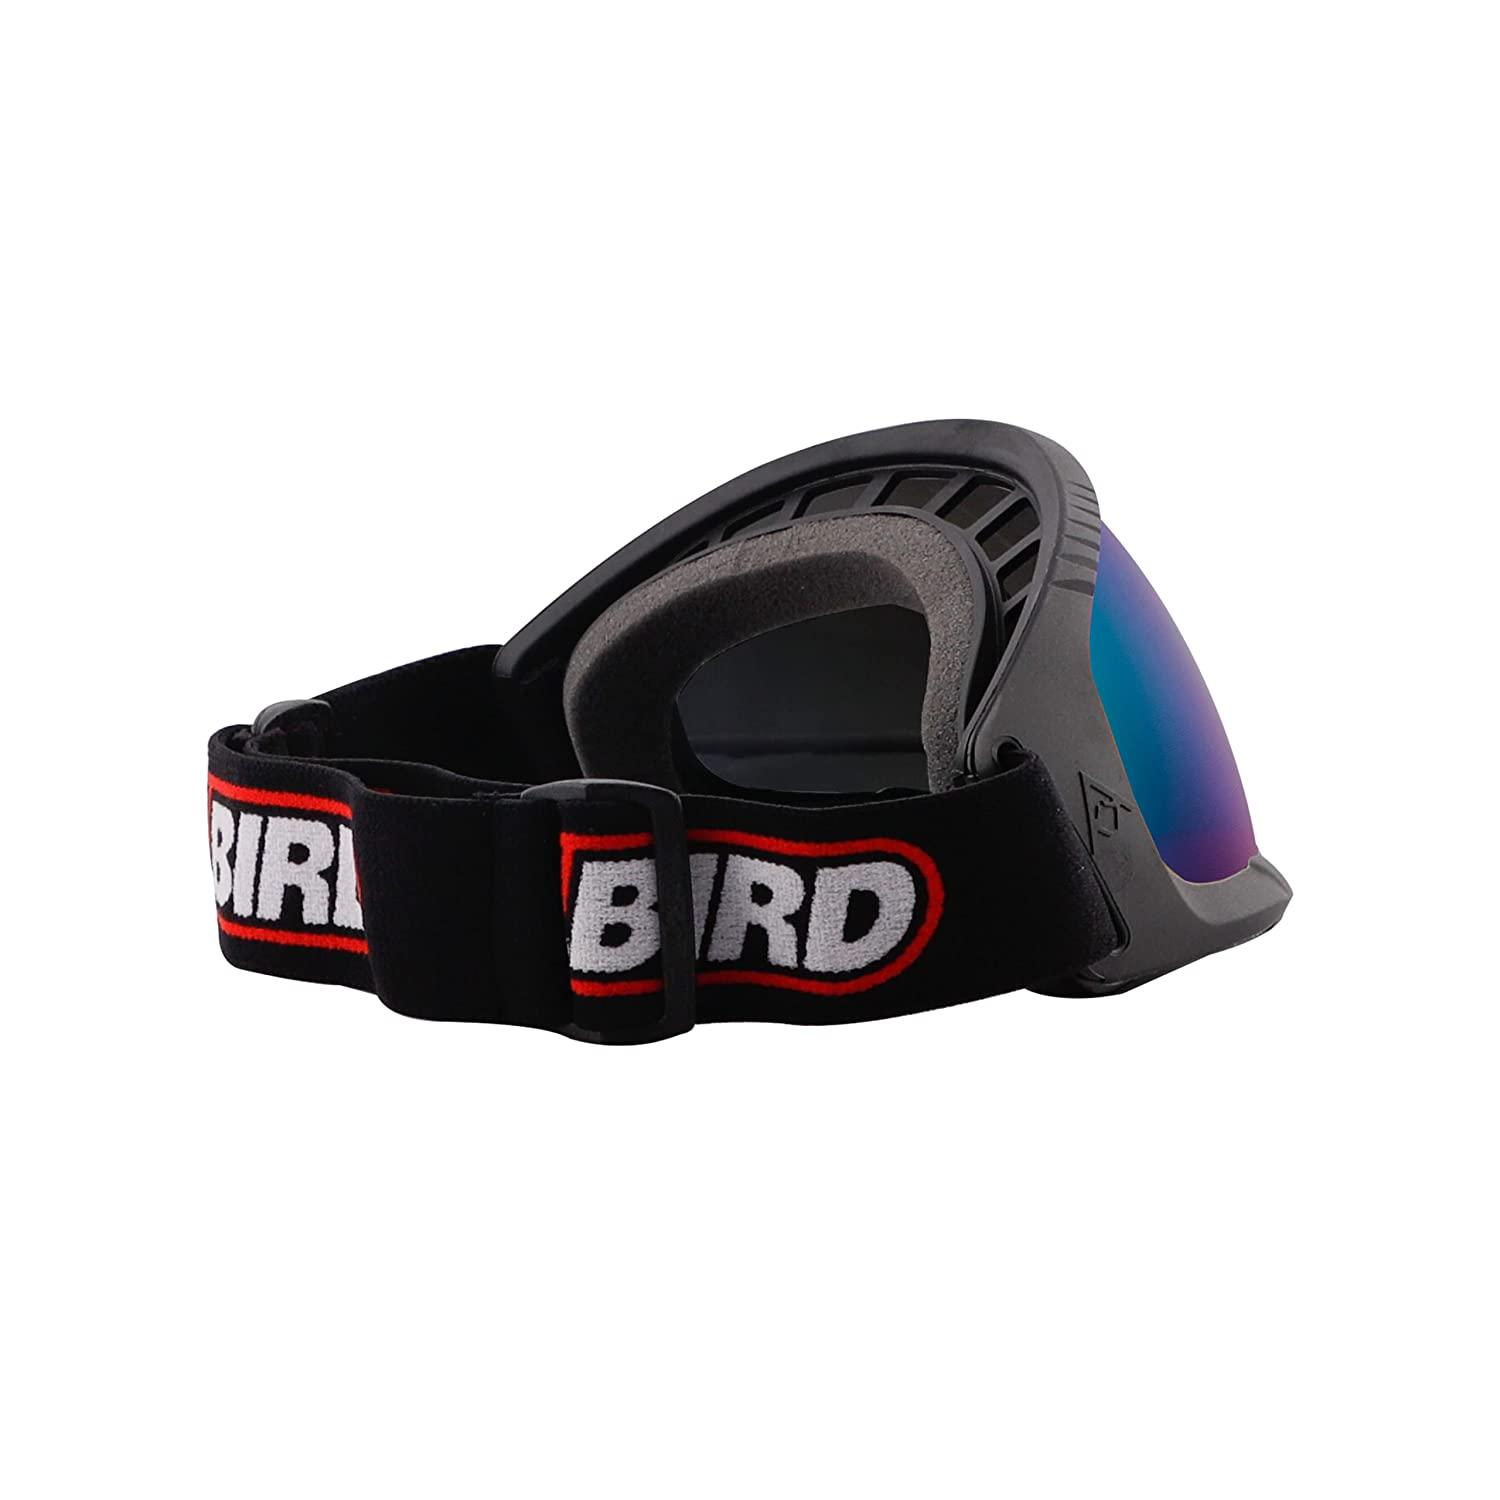 Steelbird Unisex Eye Protection Riding Glasses (Pack of 1) (Black with Rainbow)